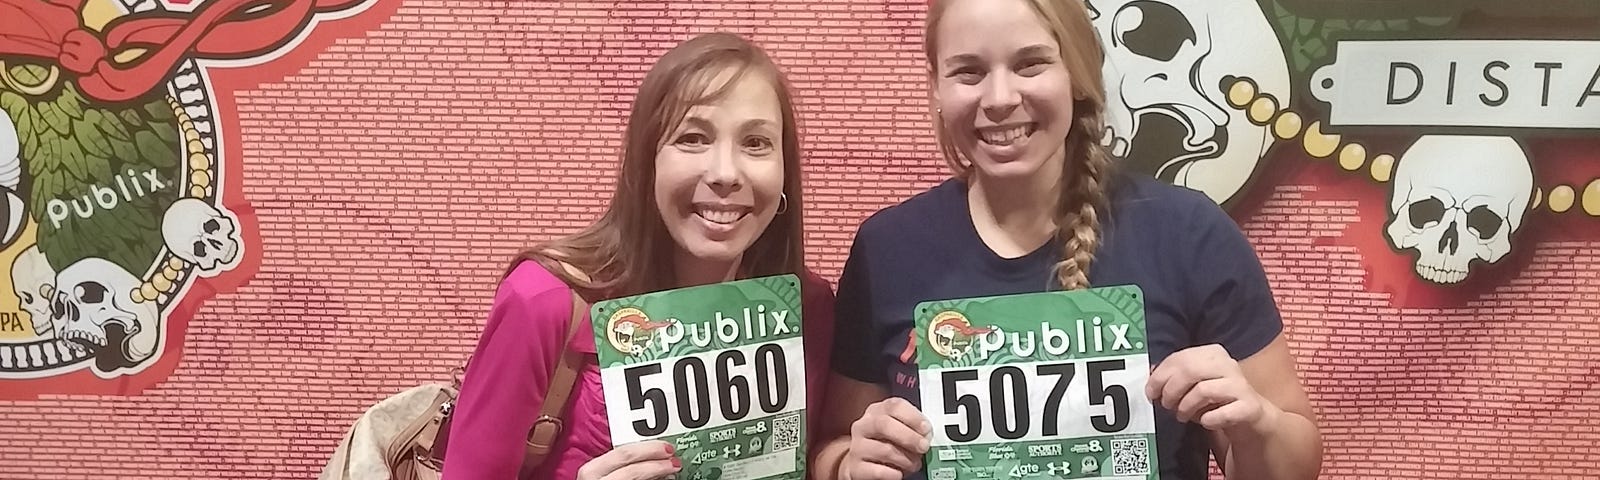 A mother and daughter holding race bib numbers for the Gasparilla 15K